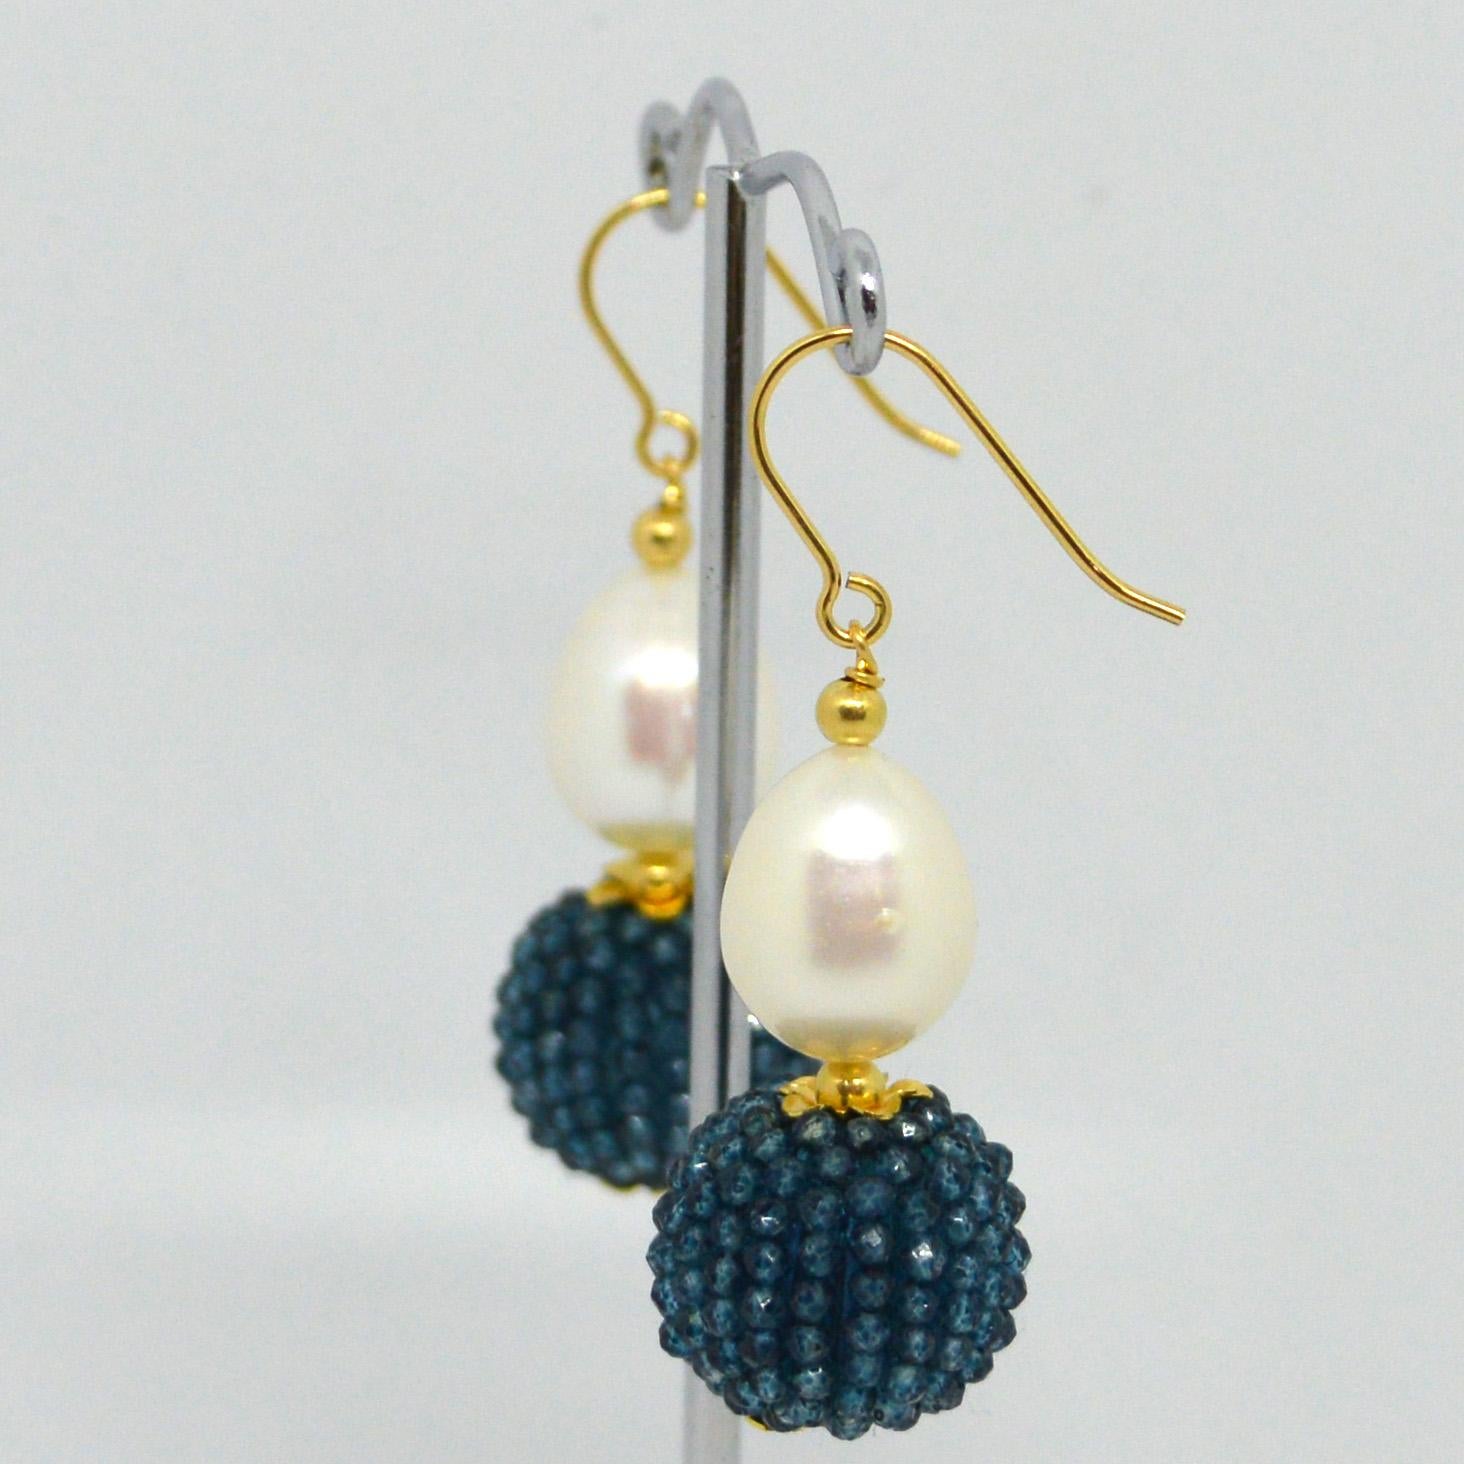 Natural Freshwater Pearl 15x10mm with a hand made beaded bead of natural London Blue Topaz mirco faceted beads 14k Gold Filled headpin and 3mm beads and Sheppard.

Total Earring length 45mm.
